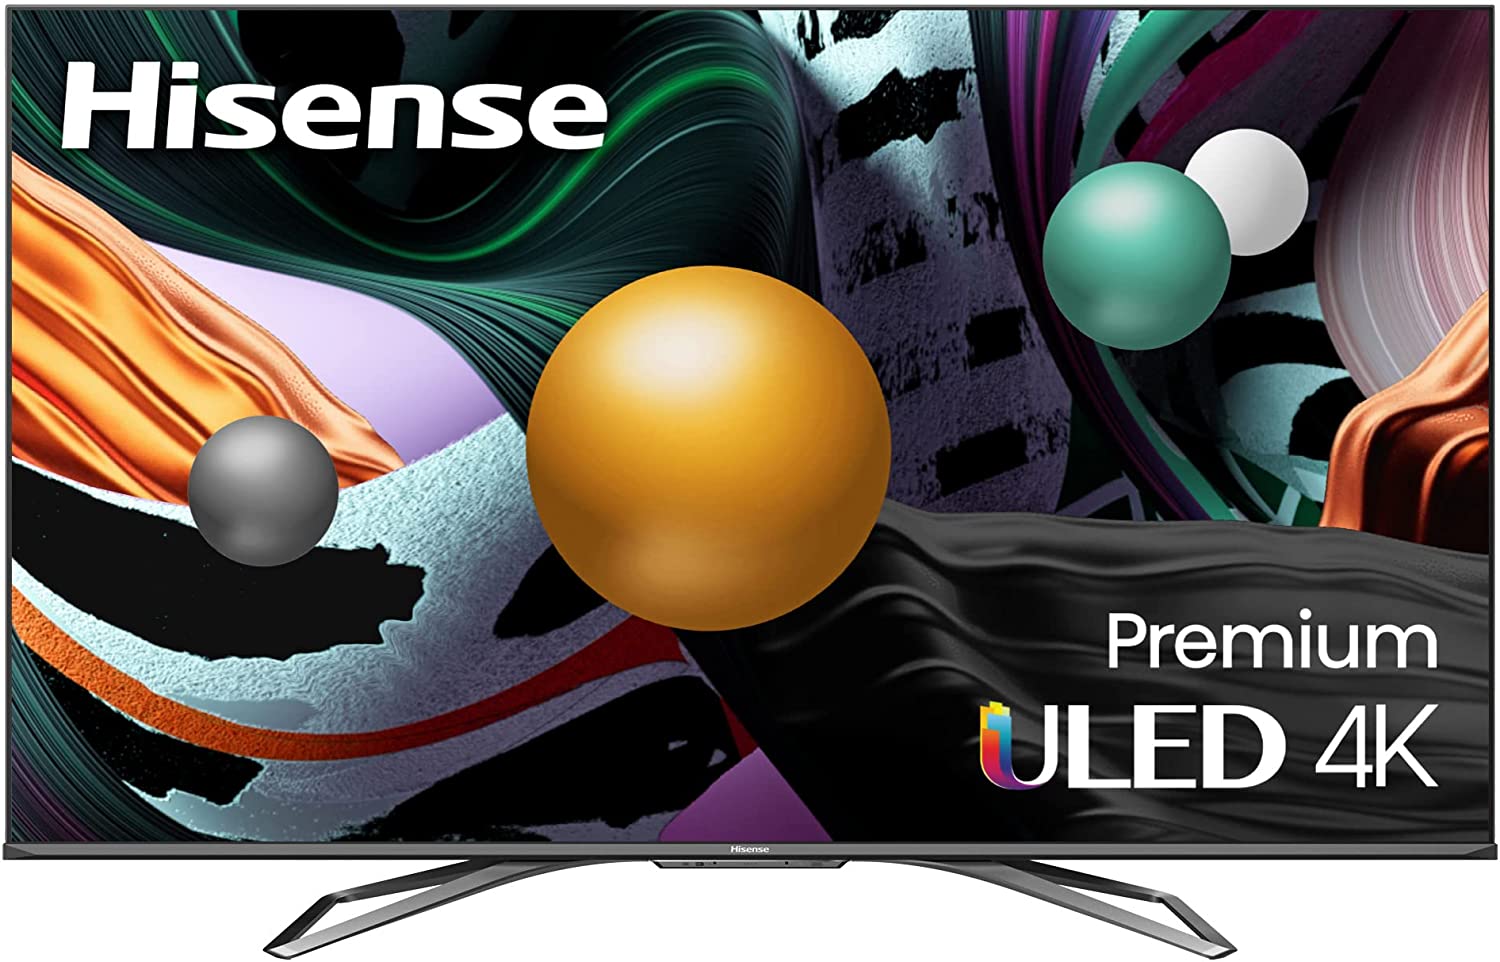 Hisense's new U8G is the brightest 4K TV I've seen for under $1,500